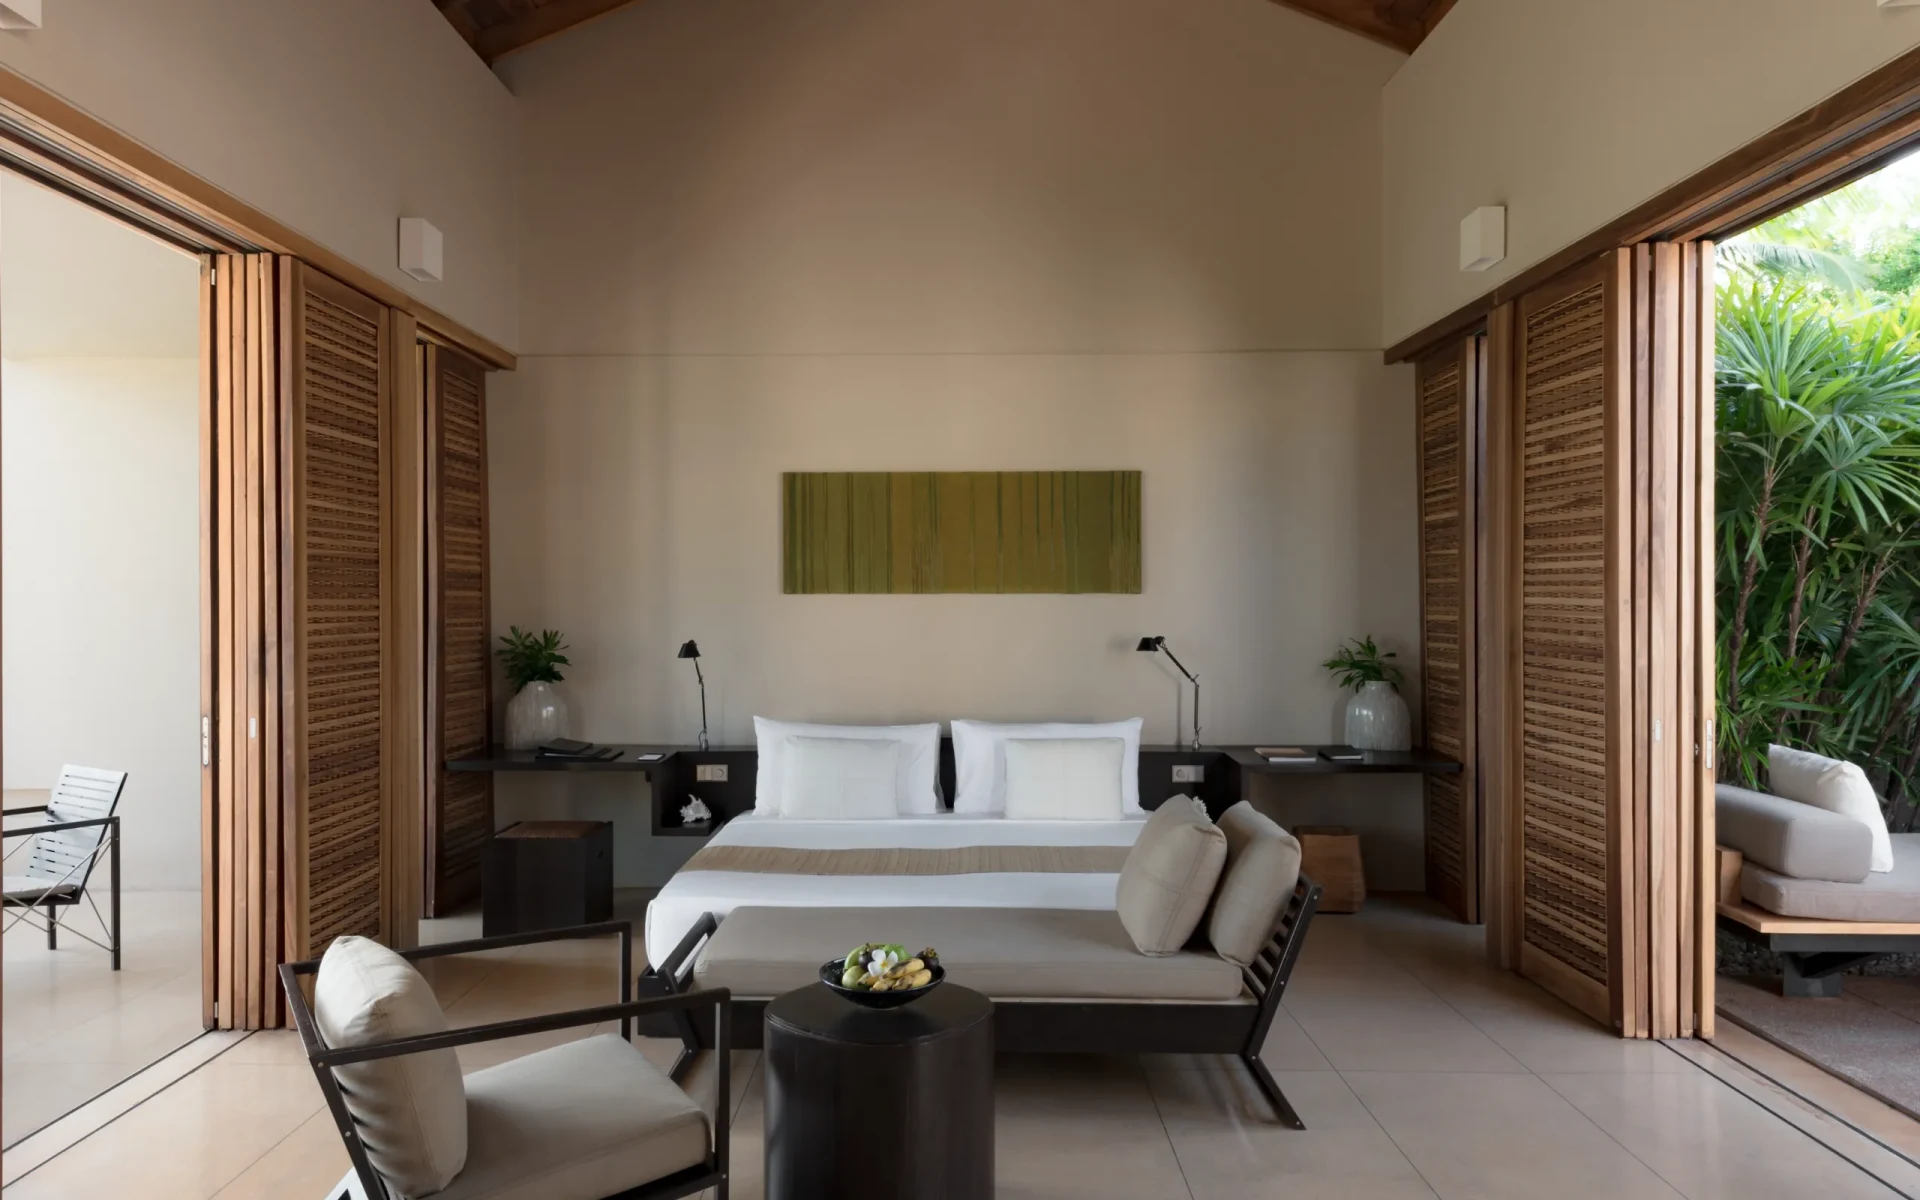 The bedrooms at Amanwella have floor-to-ceiling wooden shutters that open to the pool and garden.